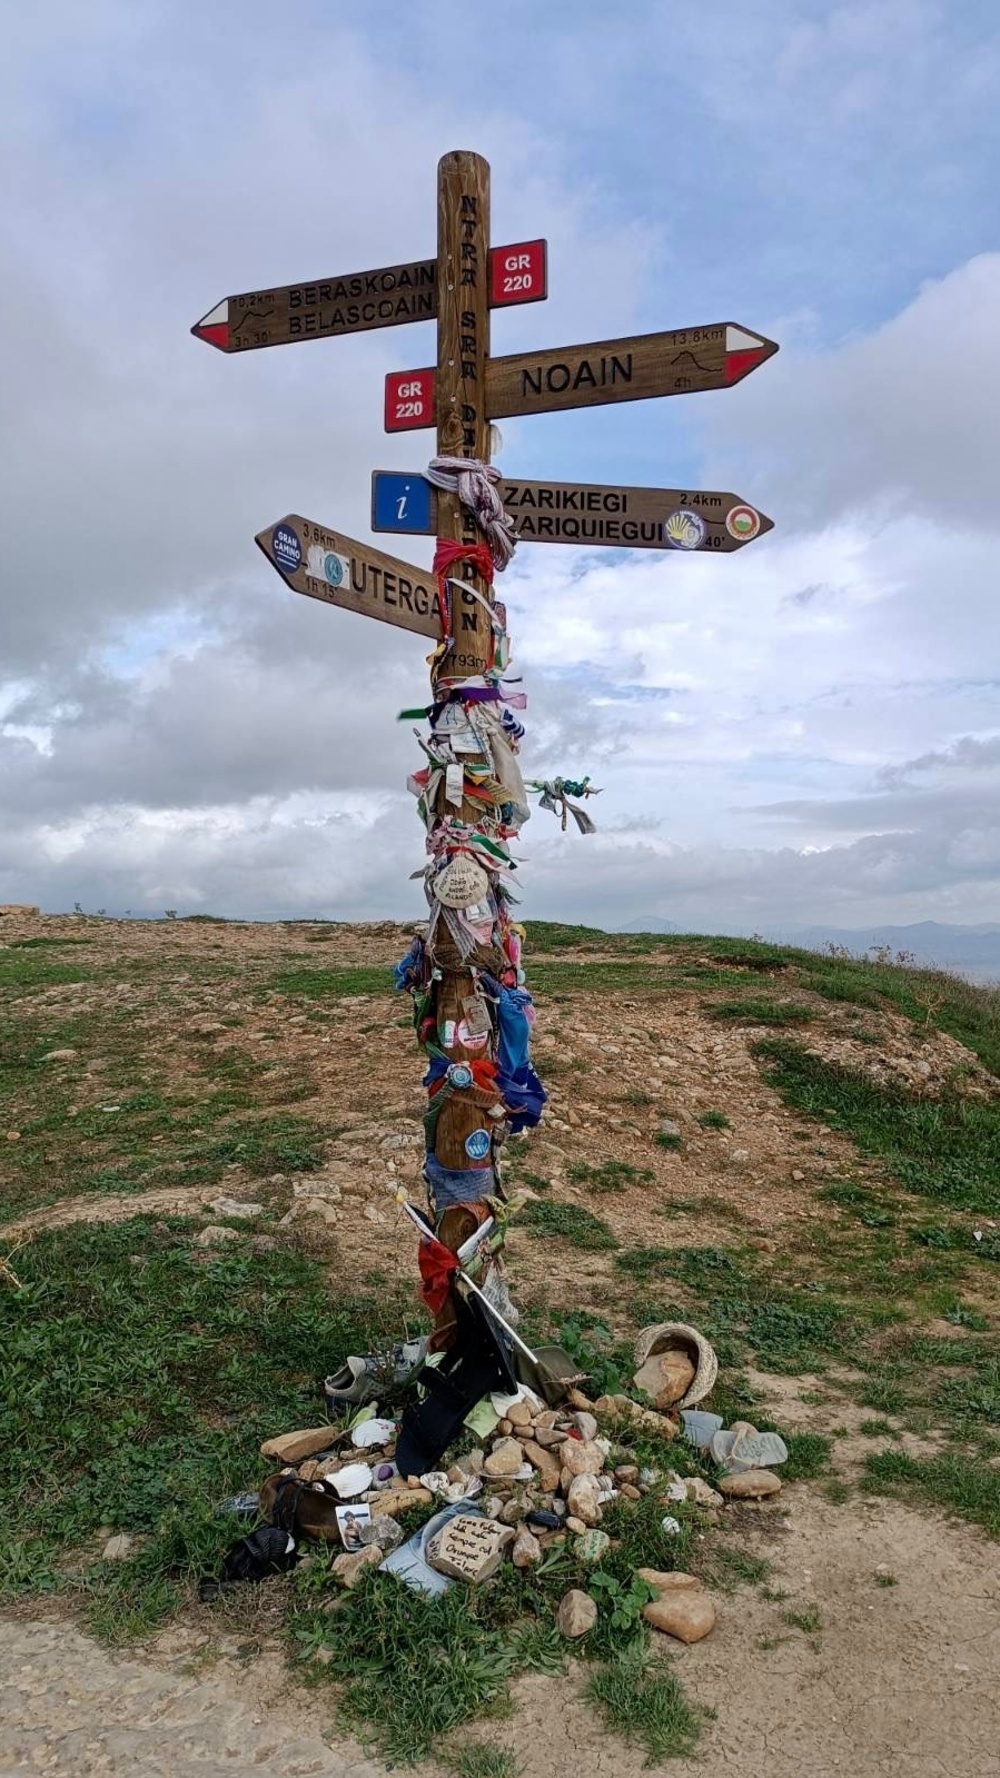 A wooden signpost covered in various objects and ribbons stands at a crossroad against a cloudy sky. Directional signs indicate nearby locations alongside pilgrim mementos.